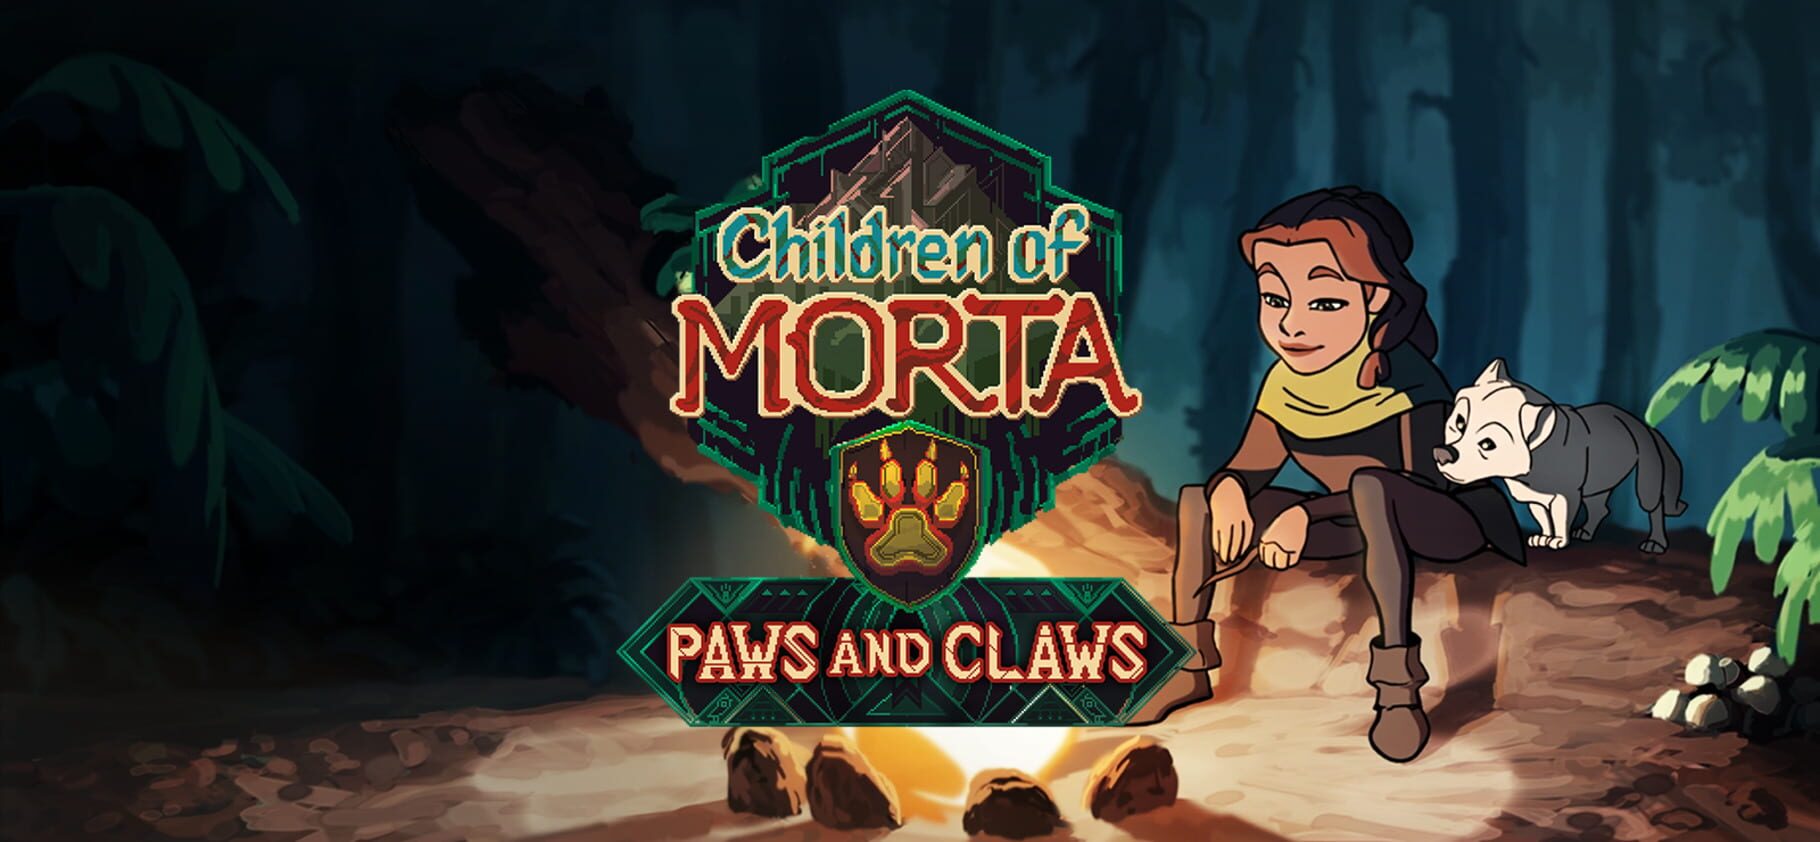 Children of Morta: Paws and Claws artwork